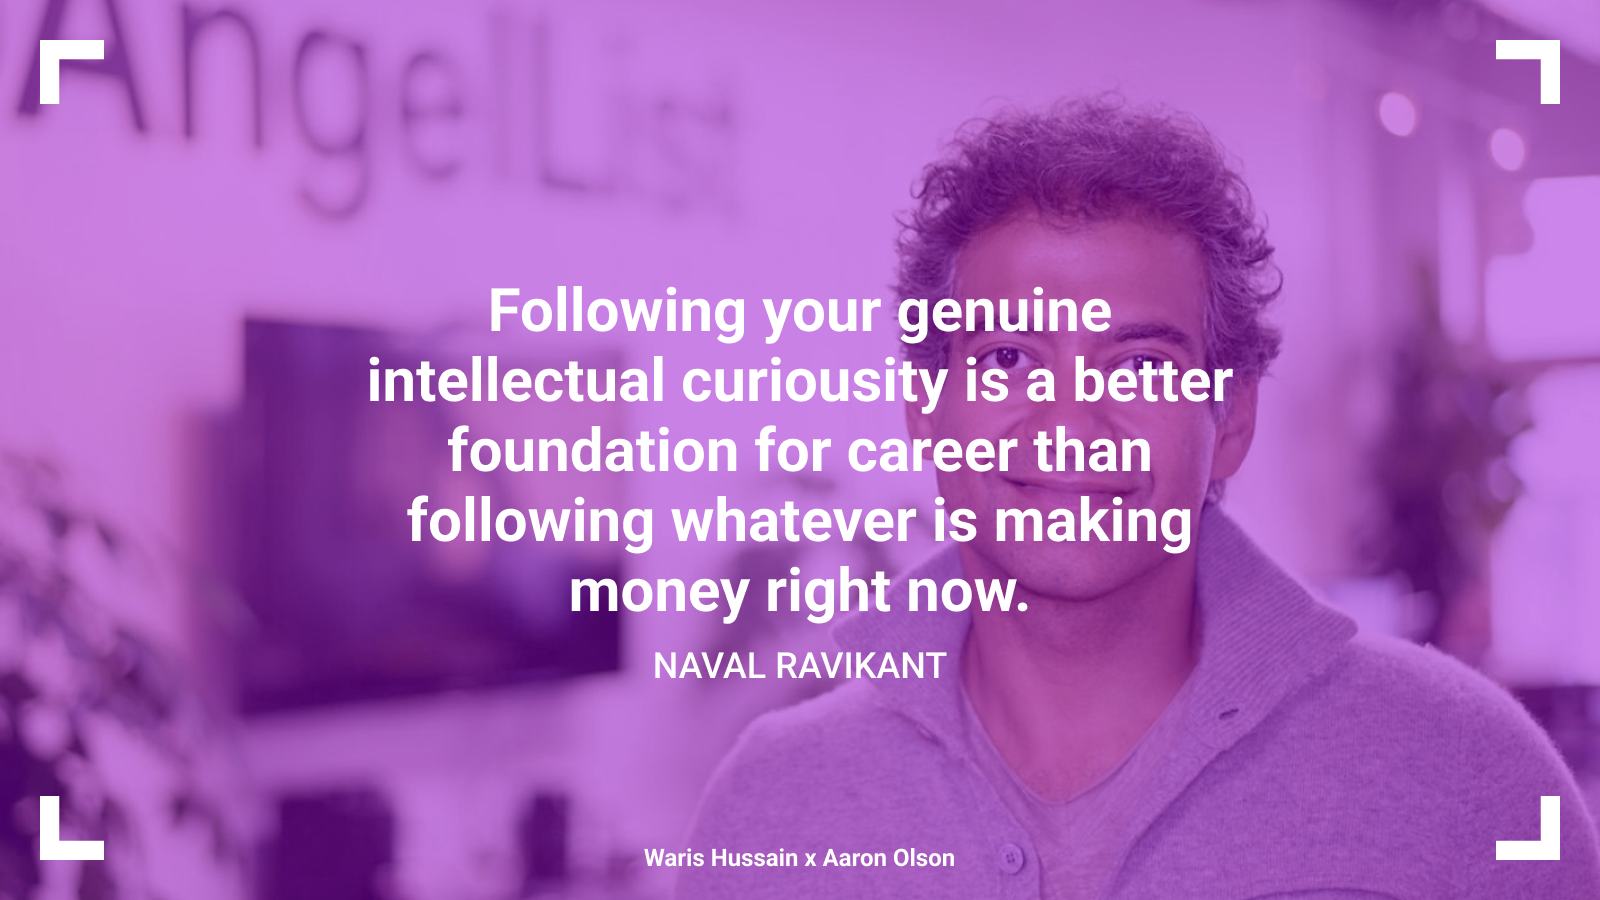 Following your genuine intellectual curiosity is a better foundation for a career than following whatever is making money right now. - Naval Ravikant